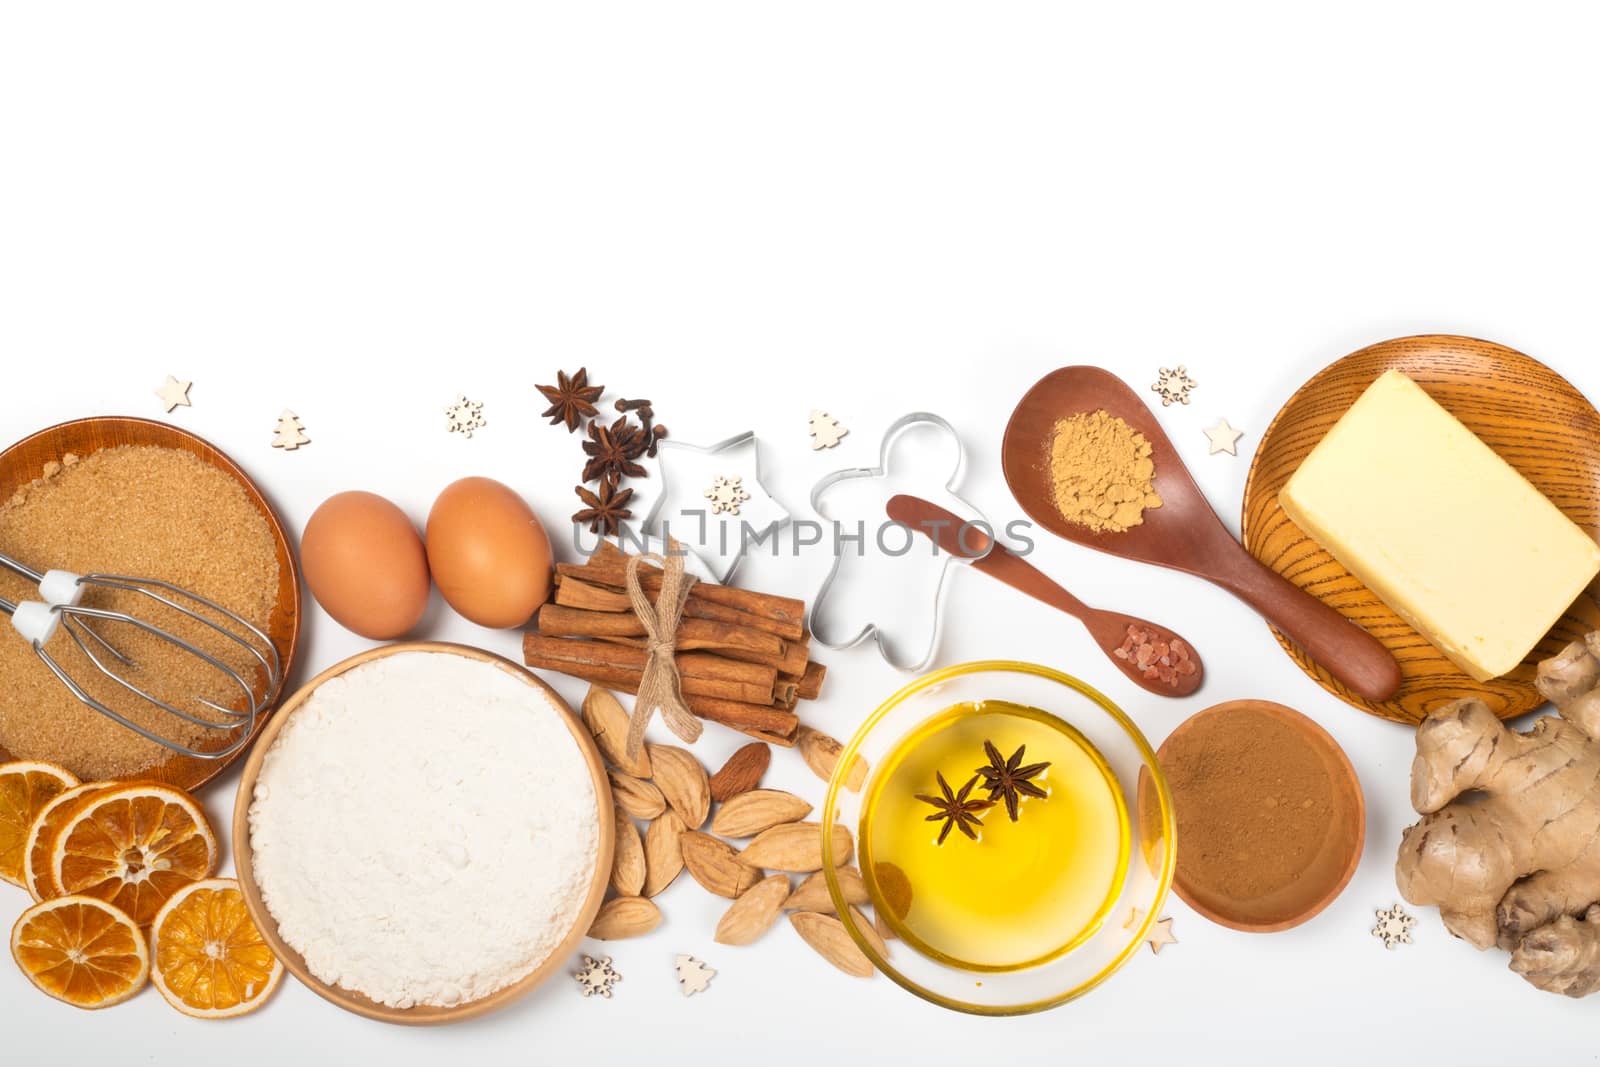 Christmas gingerbread cookies cooking background flat lay top view template with copy space for text. Baking utensils, spices and food ingredients isolated on white background